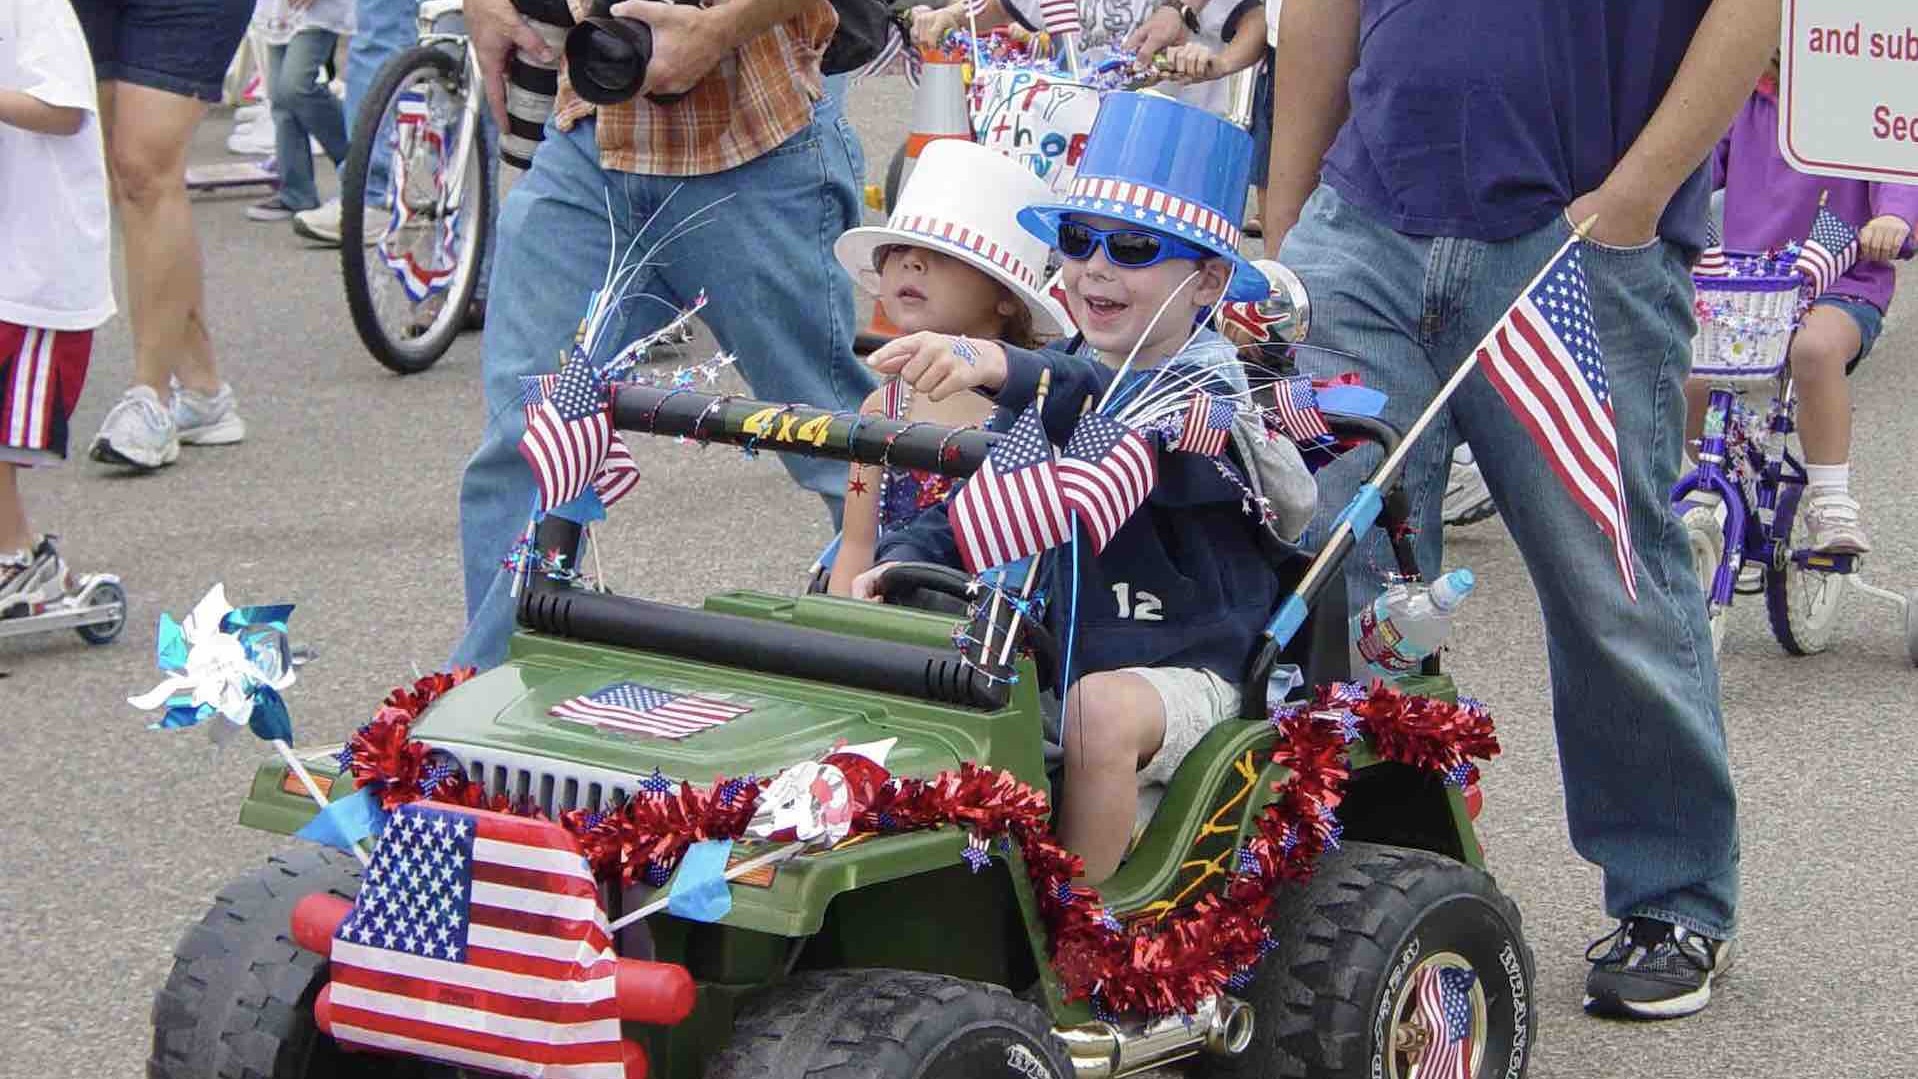 City of Westlake Village- July 4 parade is one of the best things to do in Westlake Village